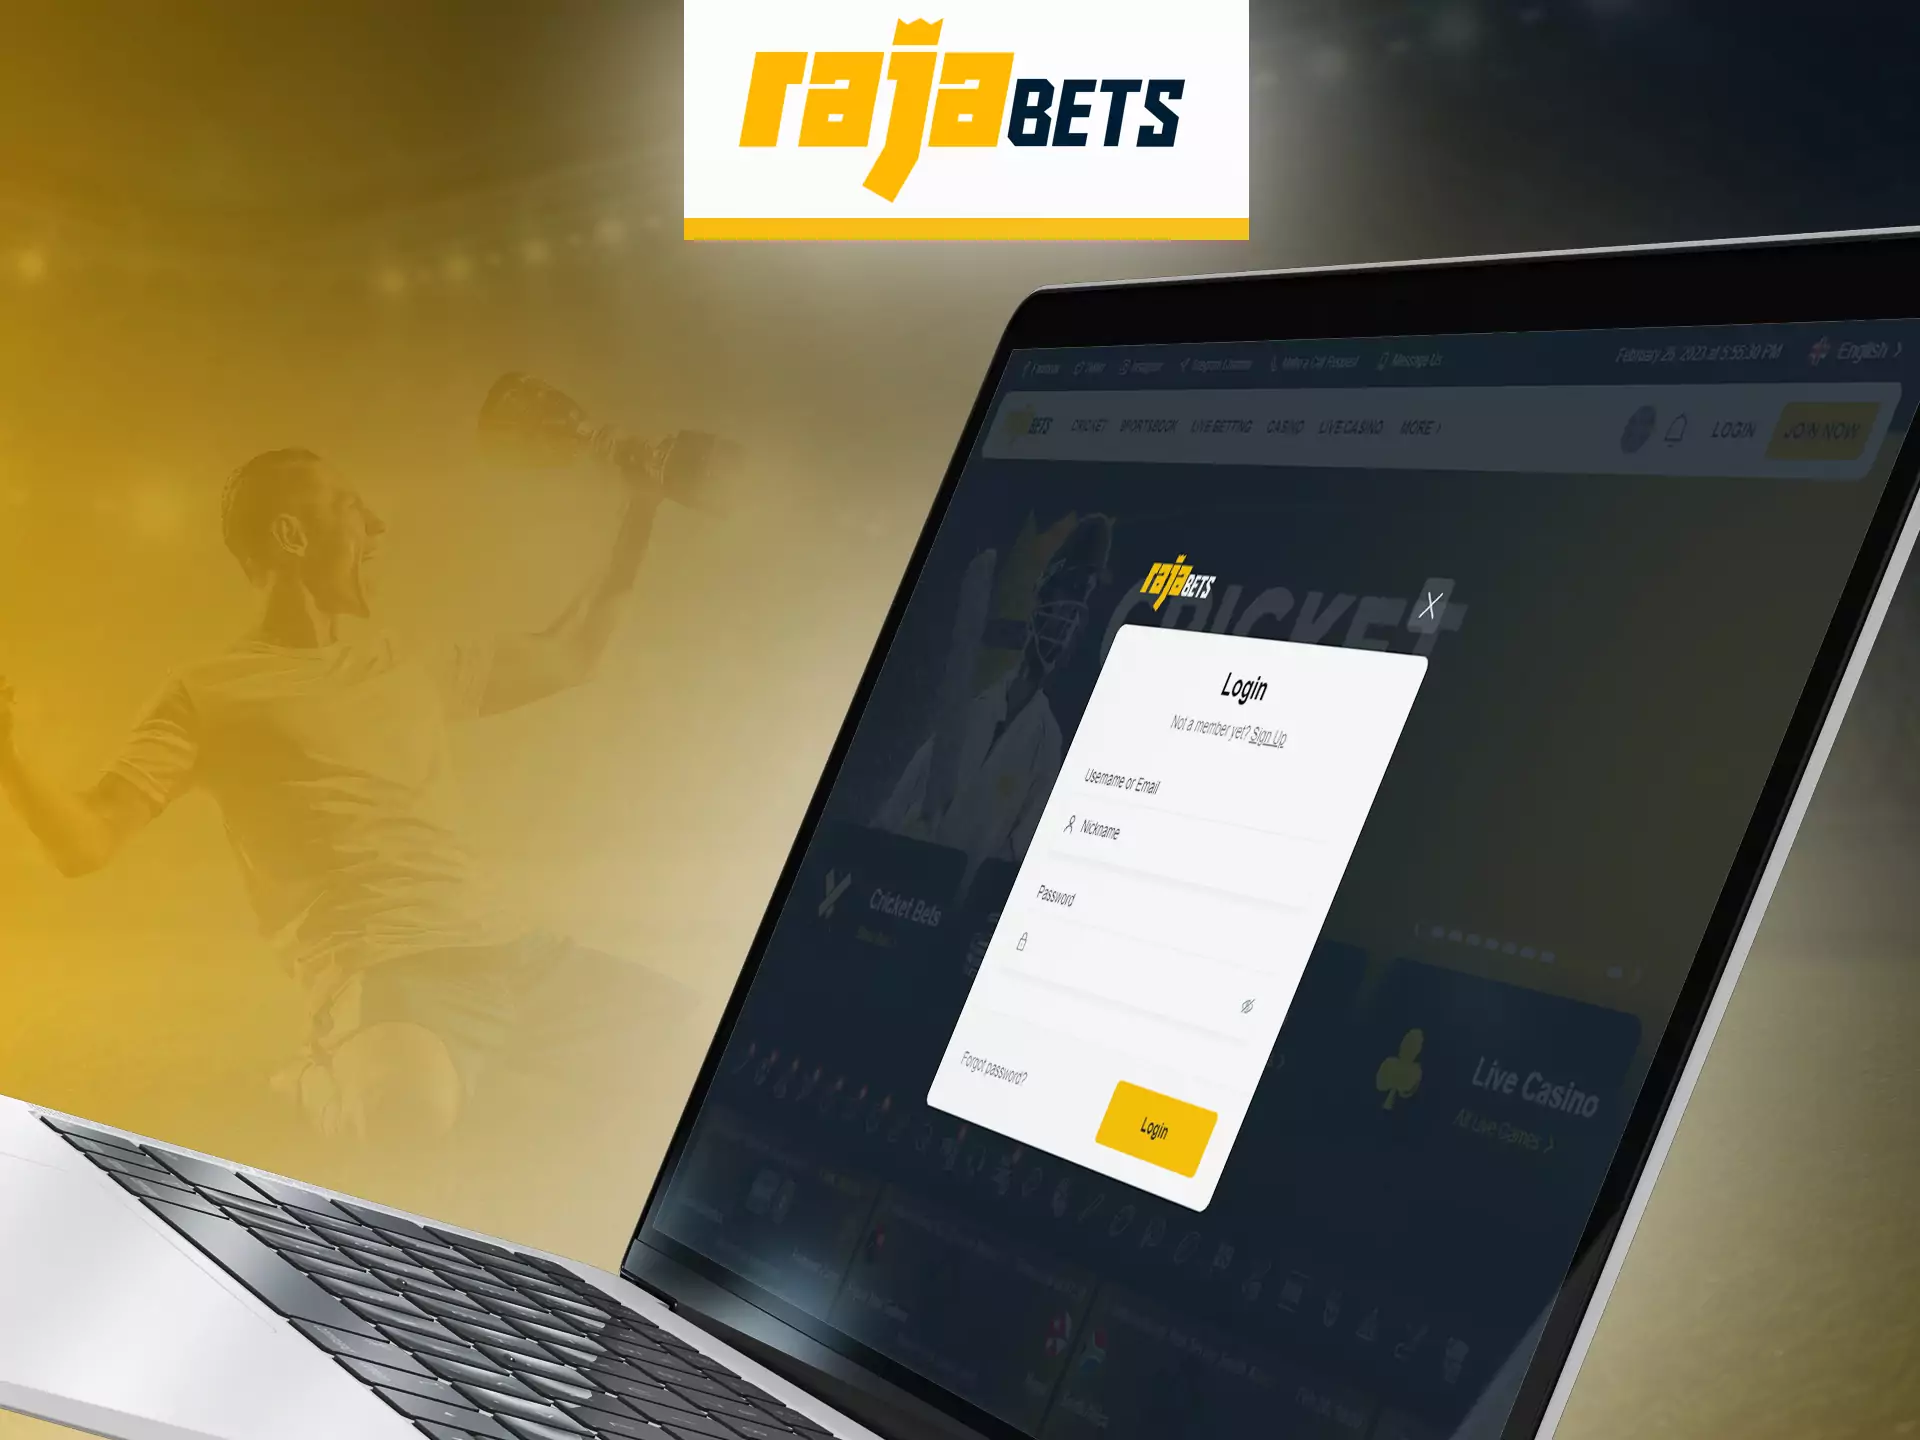 Log in to your Rajabets account to place bets.